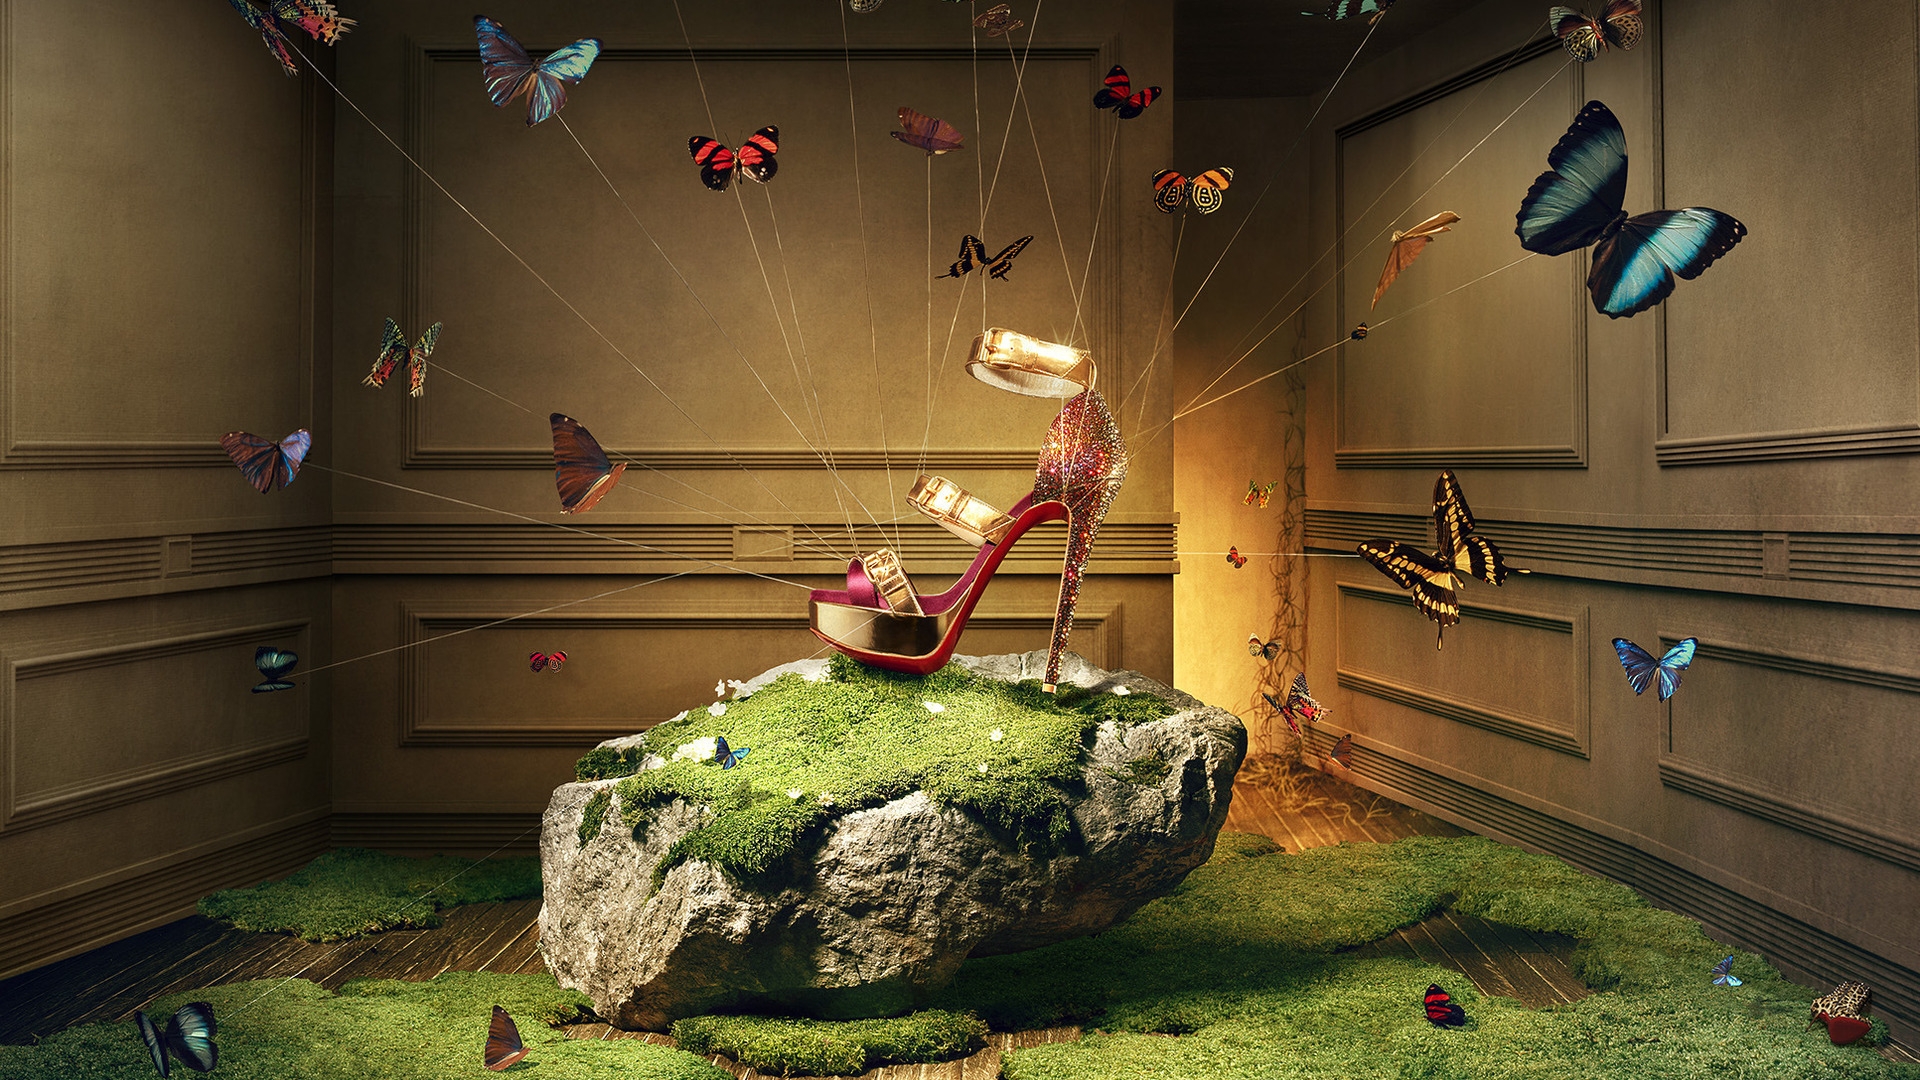 Christian Louboutin Shoes for 1920 x 1080 HDTV 1080p resolution